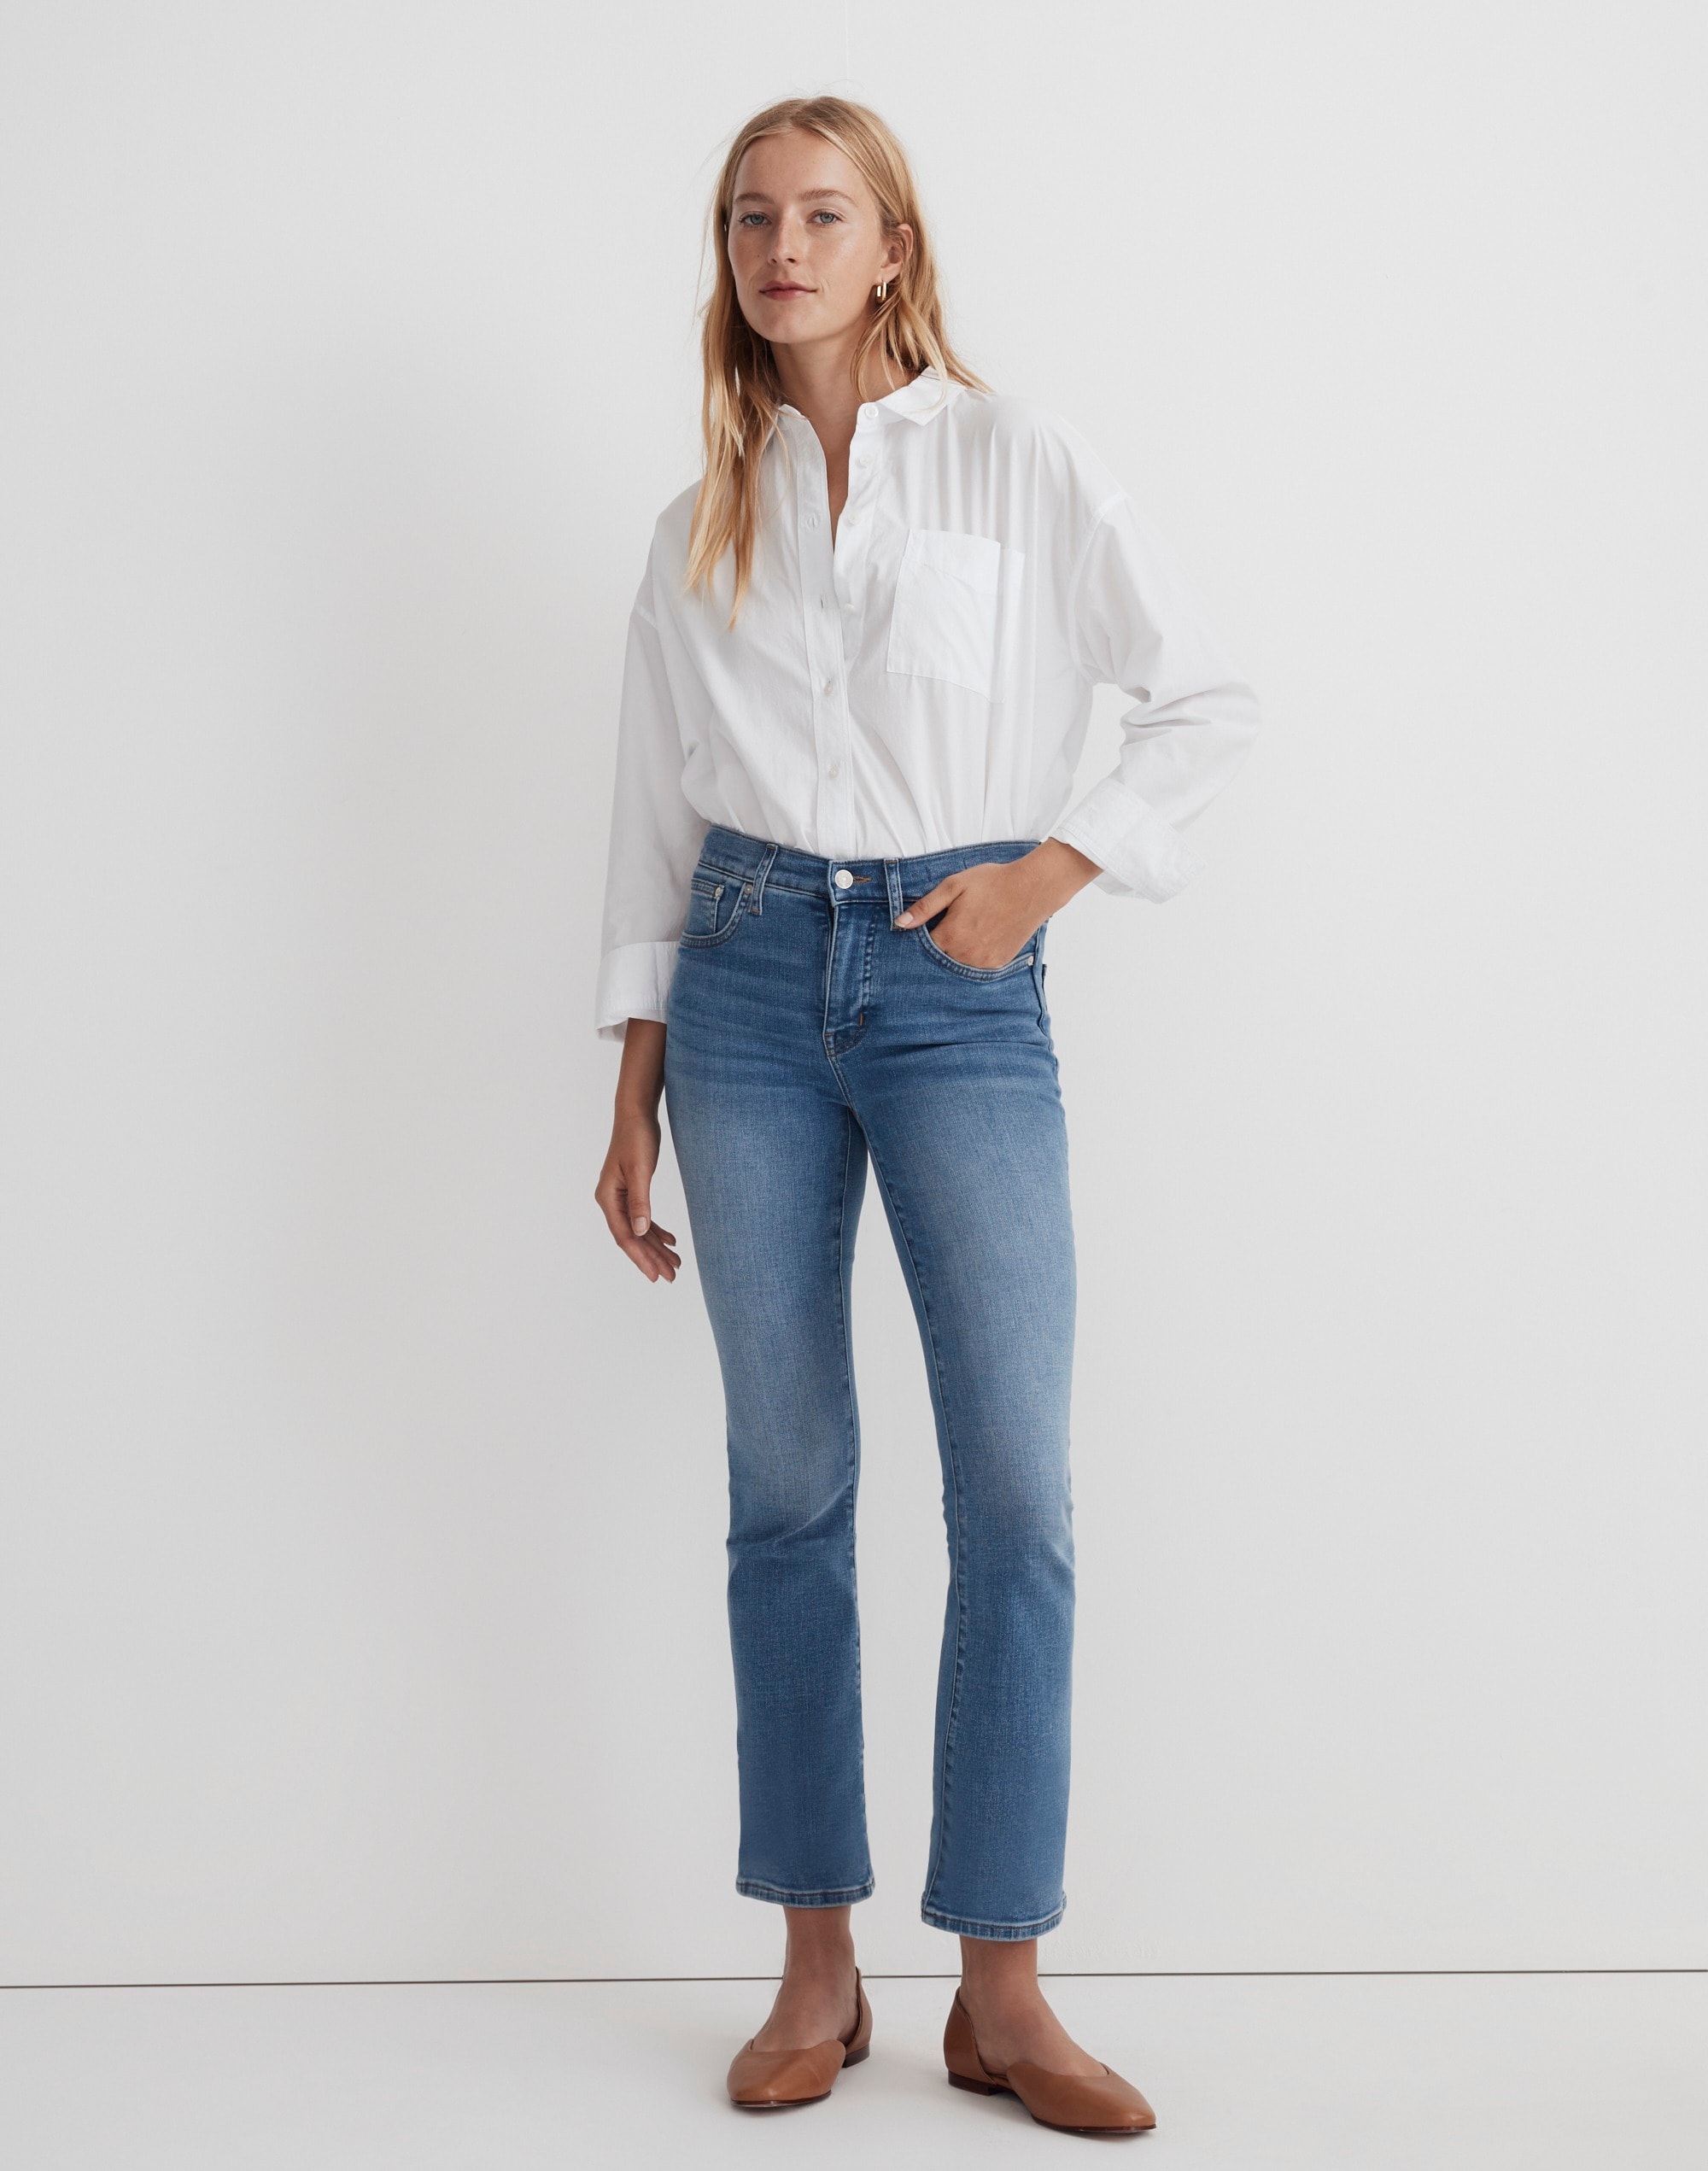 Kick Out Crop Jeans in Mather Wash | Madewell